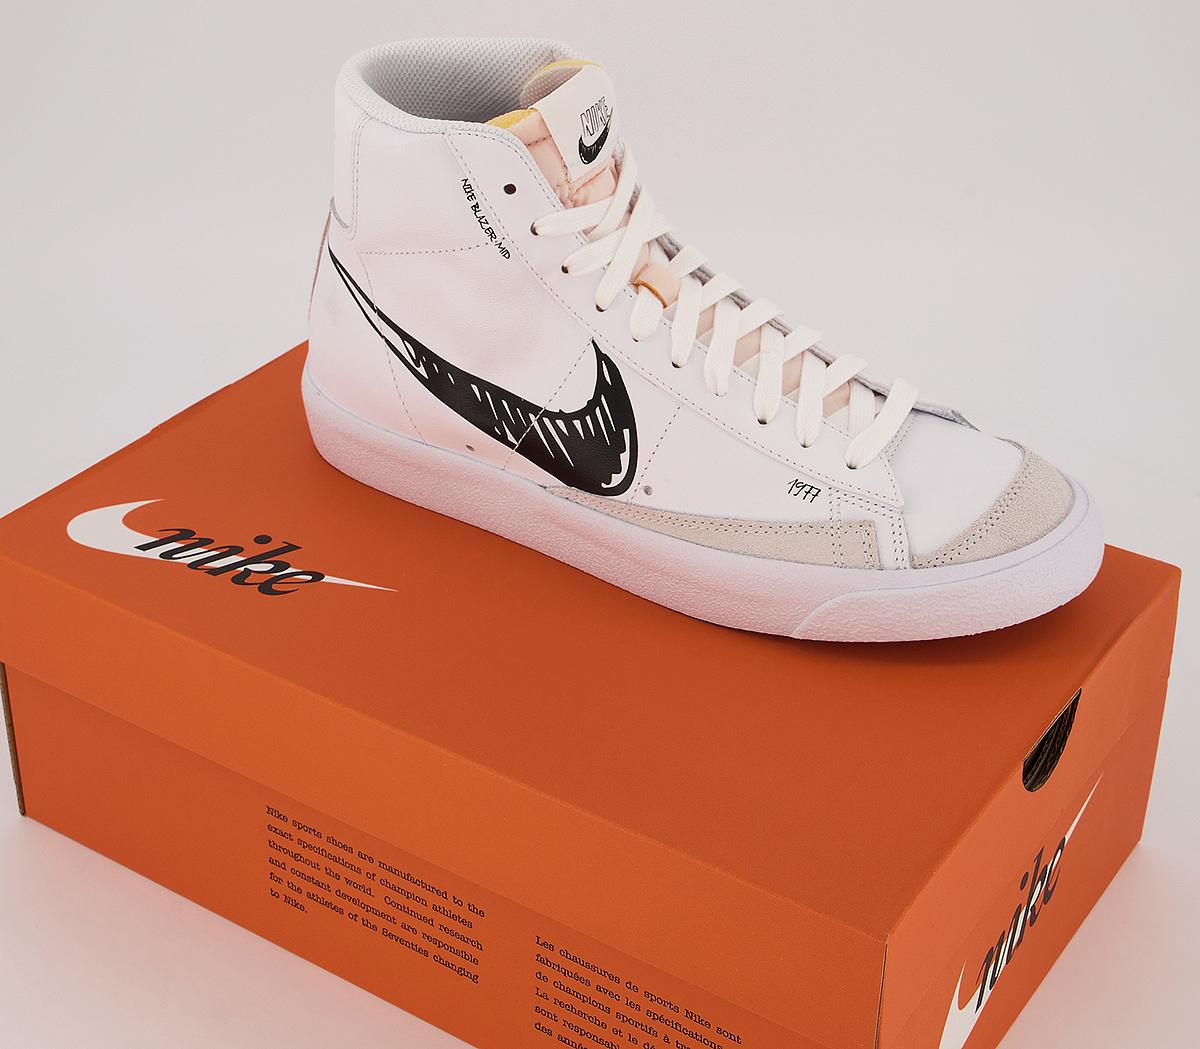 Nike Blazer Mid 77 Trainers White Black Scribble - His trainers